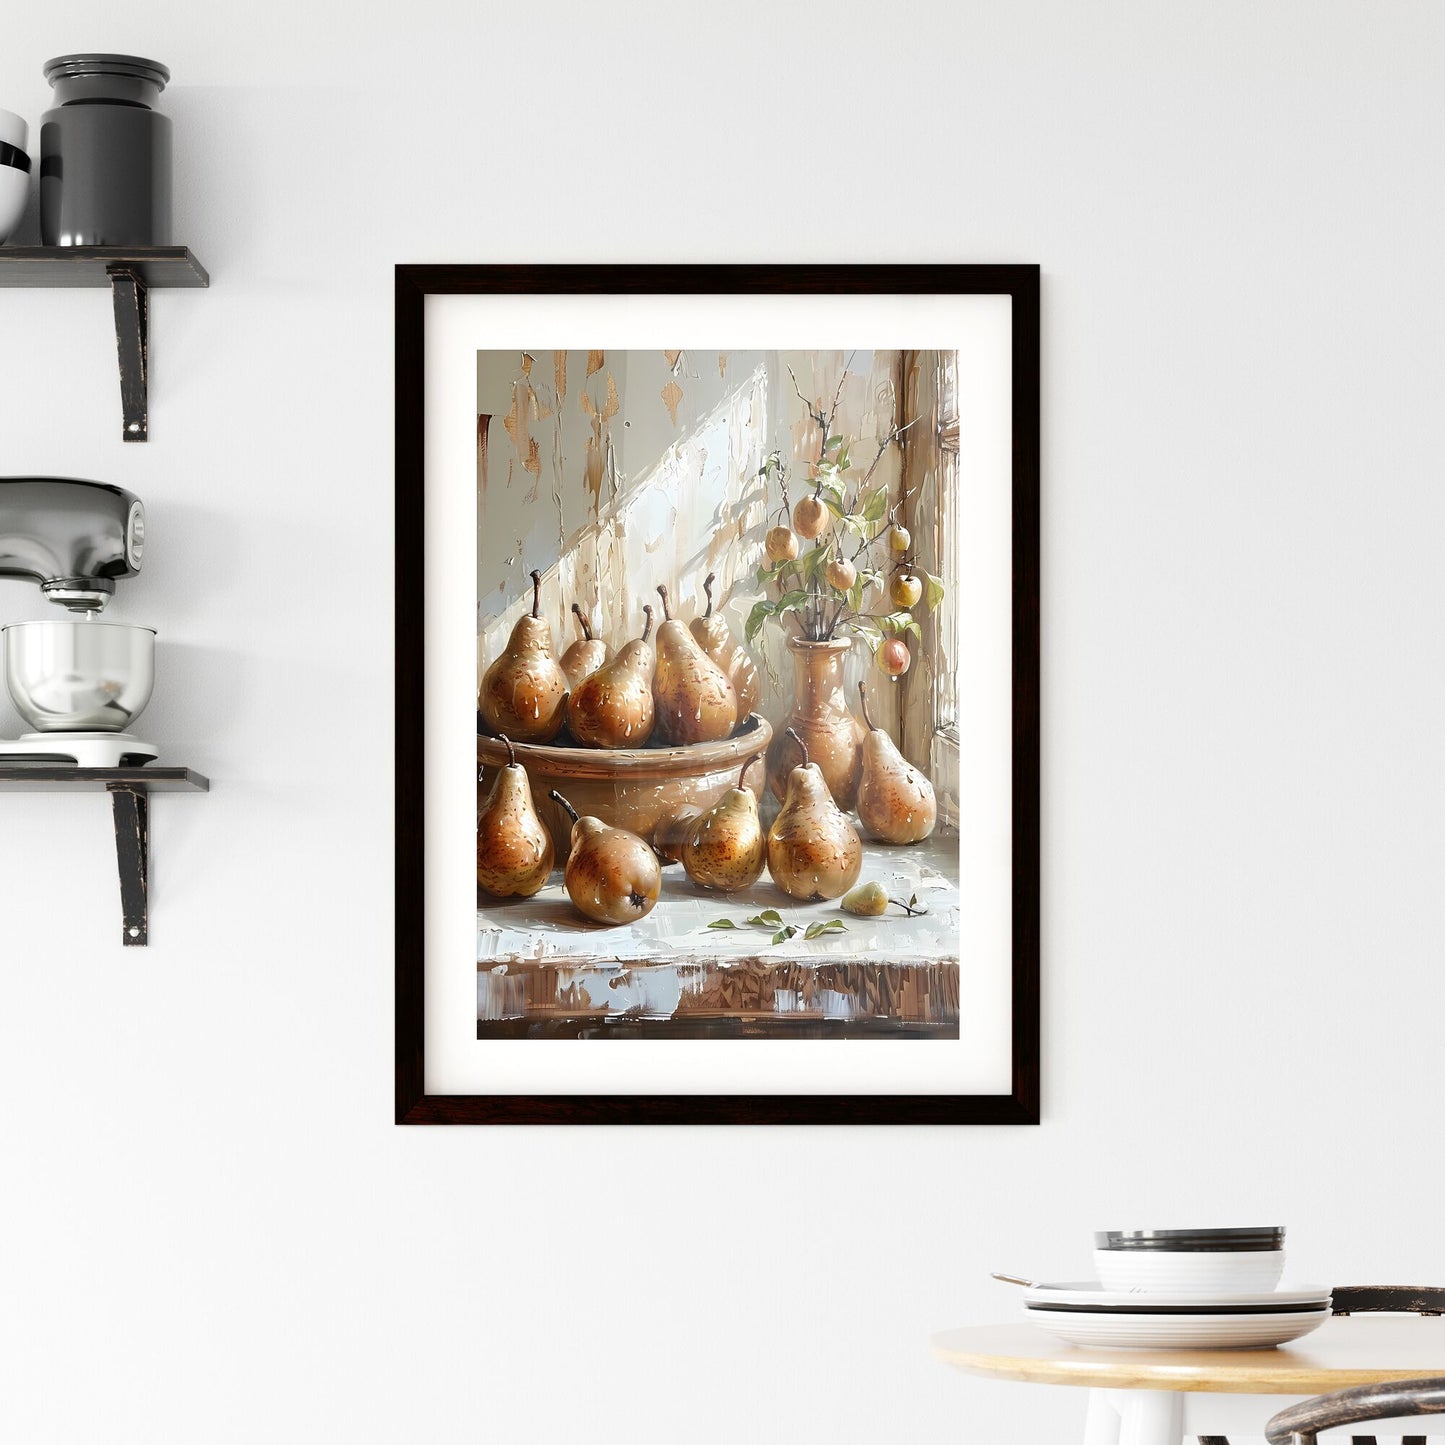 Impressionist Art Oil Painting of Pears on Kitchen Countertop in Rustic Clay Bowl with Neutral Colors and White Background Default Title